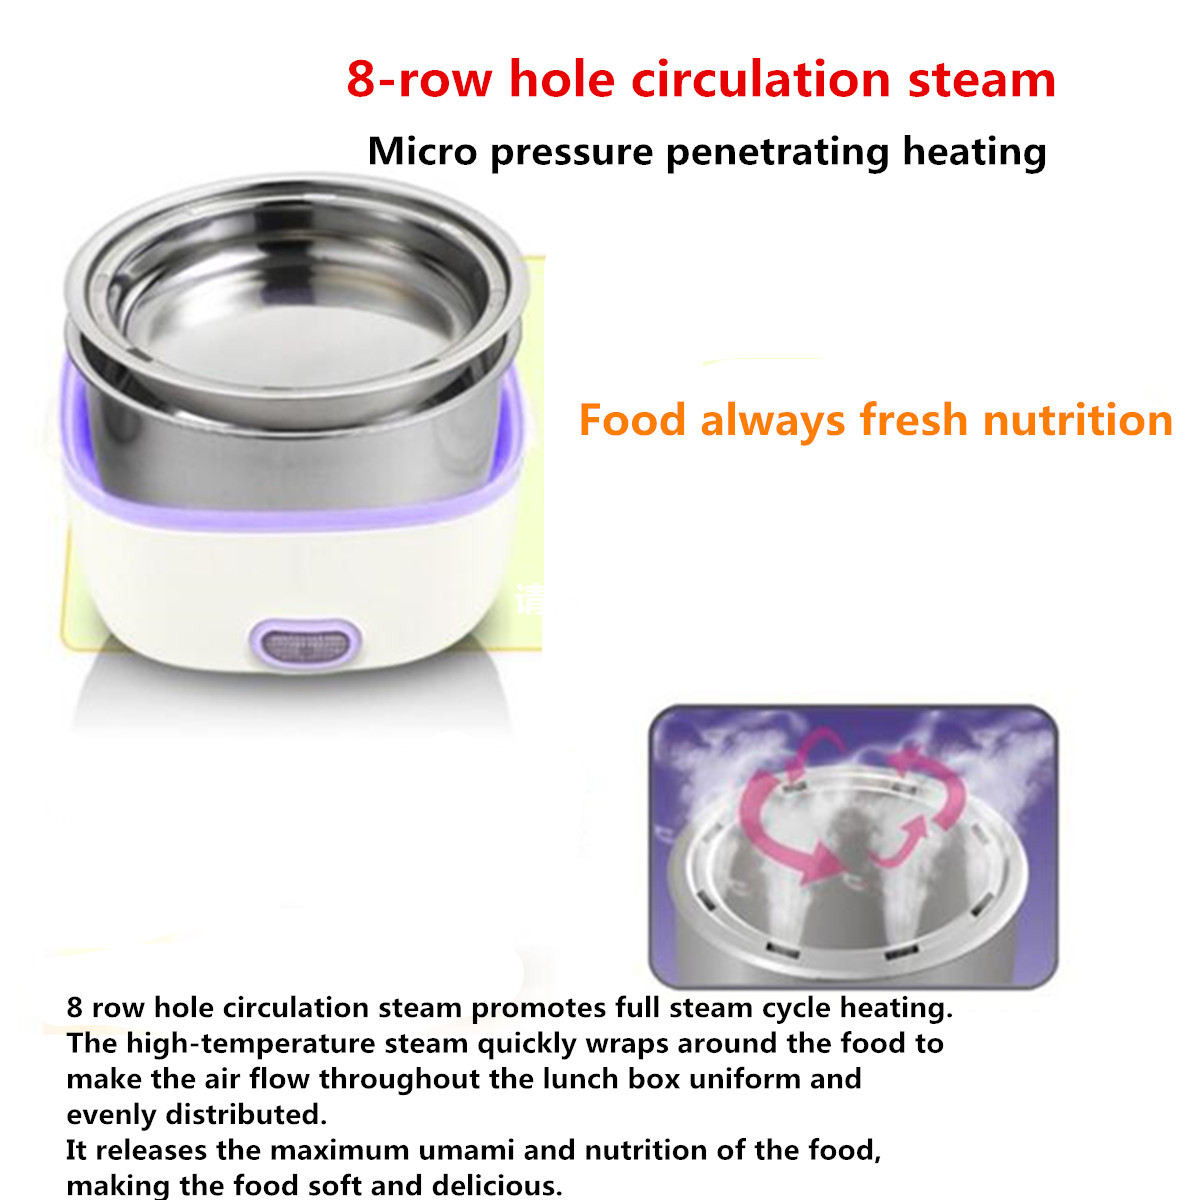 Portable Rice Cooker Thermal Heating Electric Lunch Box 2 Layers Food Steamer Cooking Container Meal Lunchbox Warmer 110V/220V